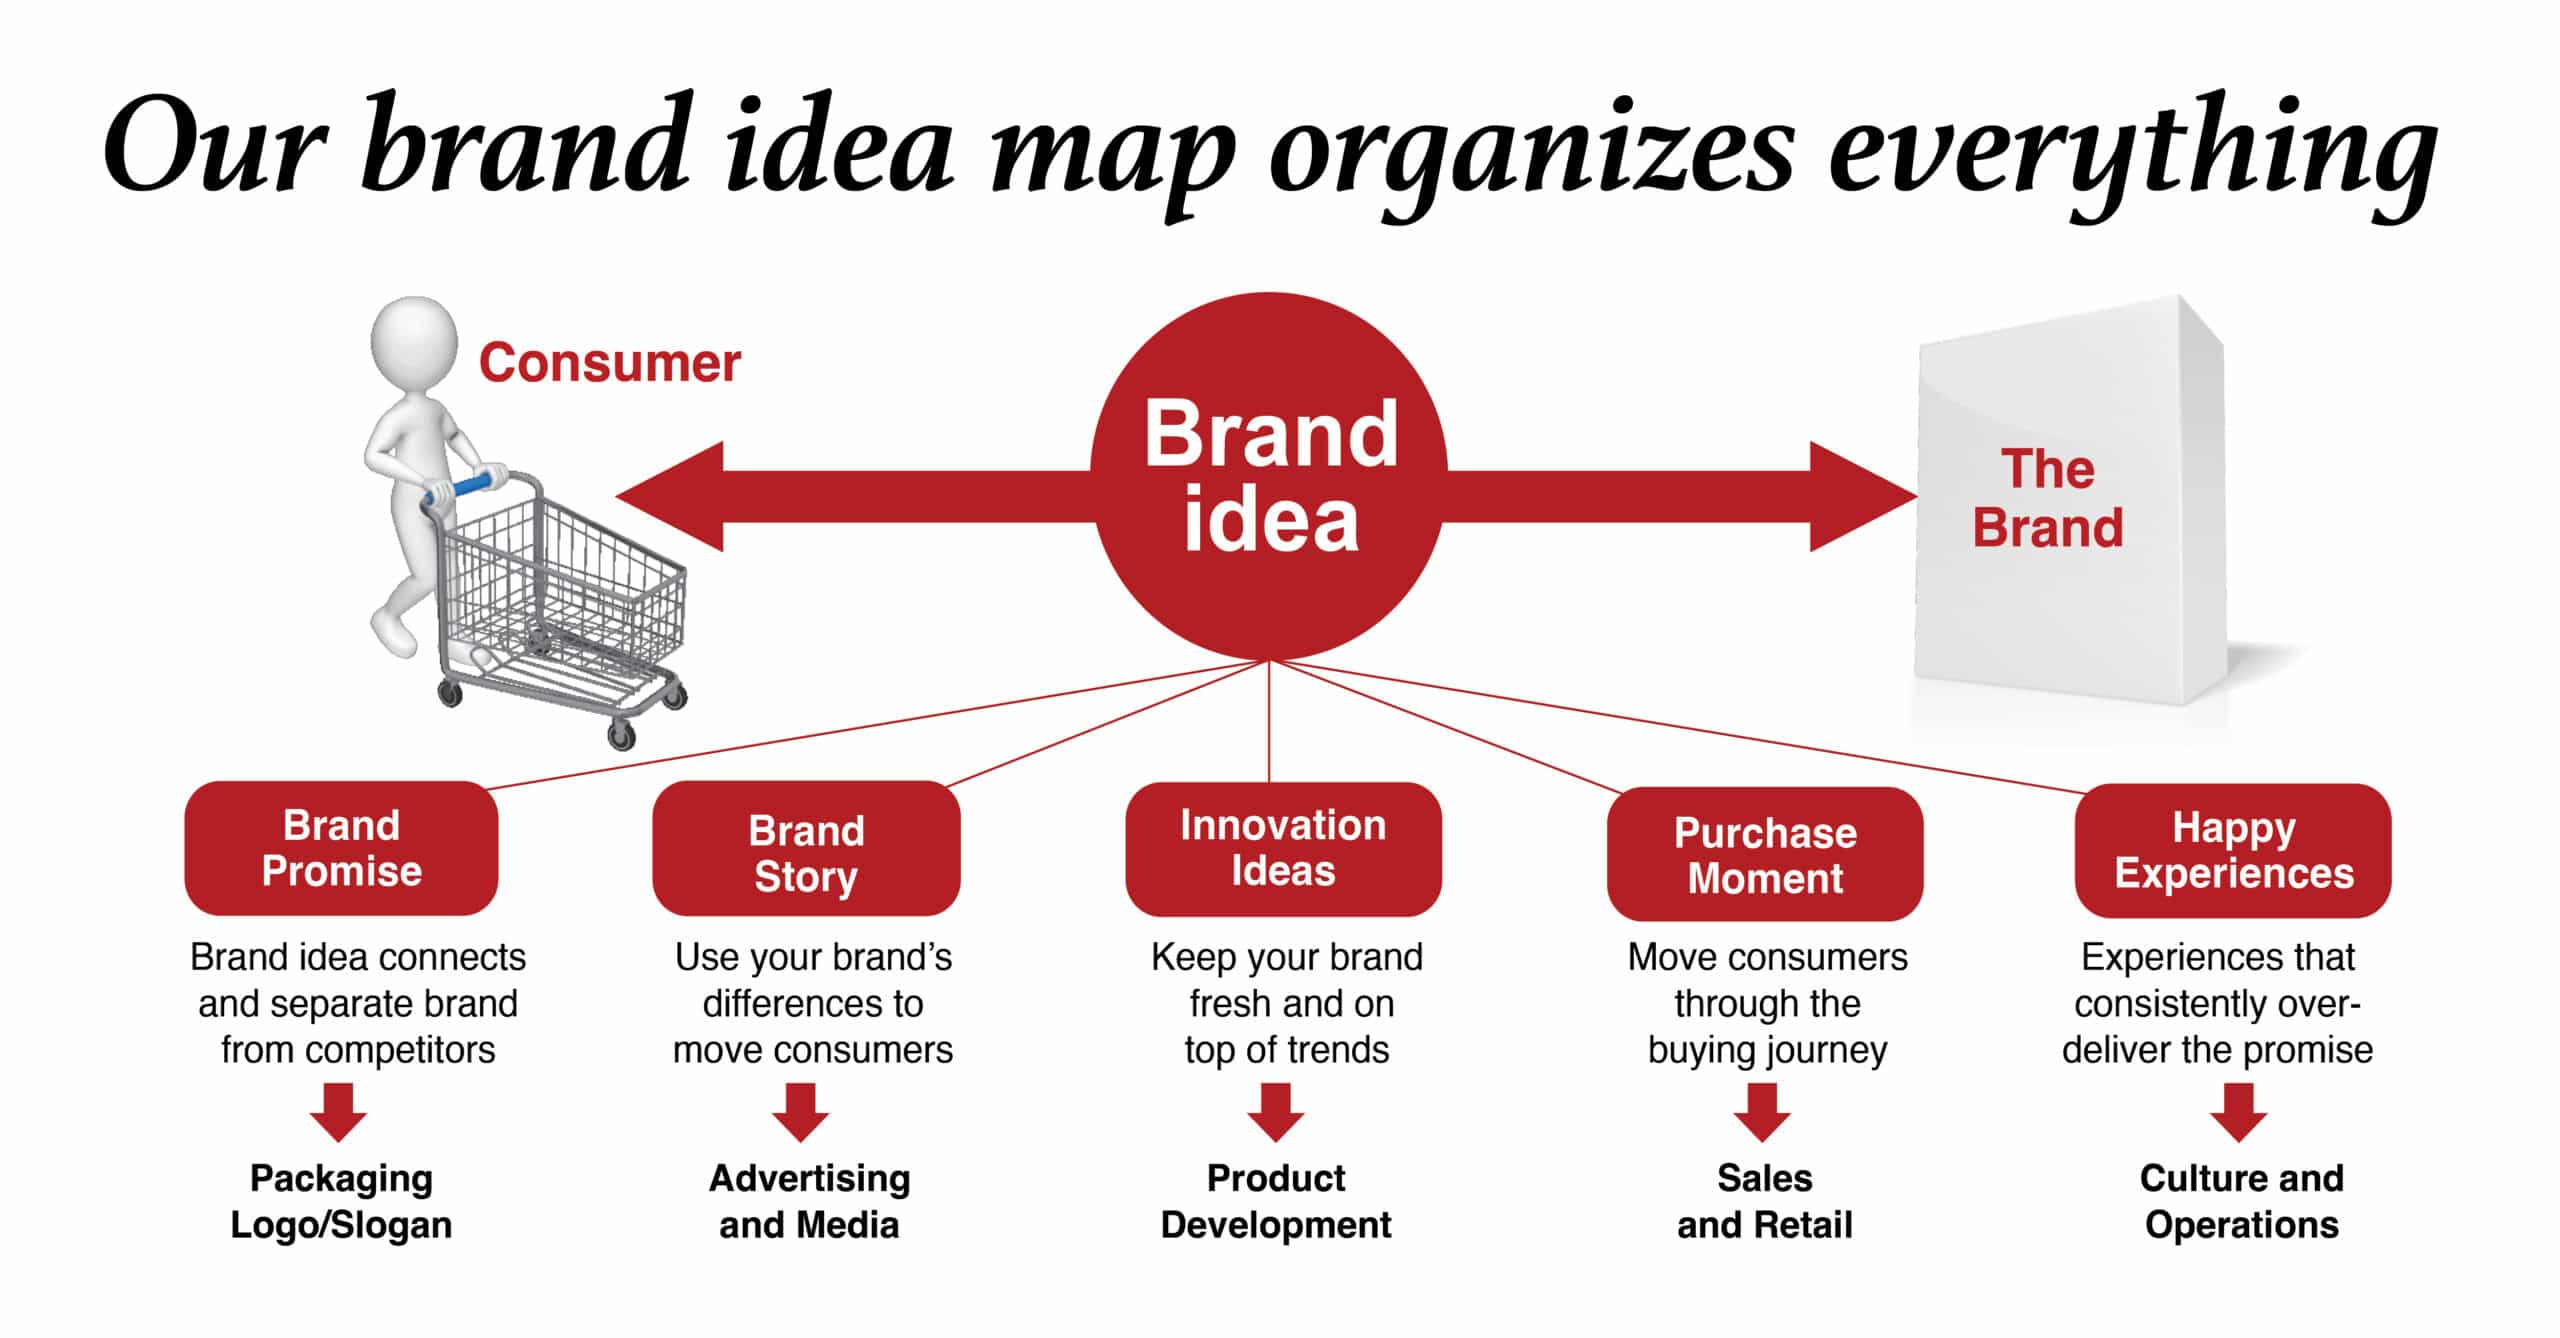 Brand Idea Map 5 consumer touchpoints